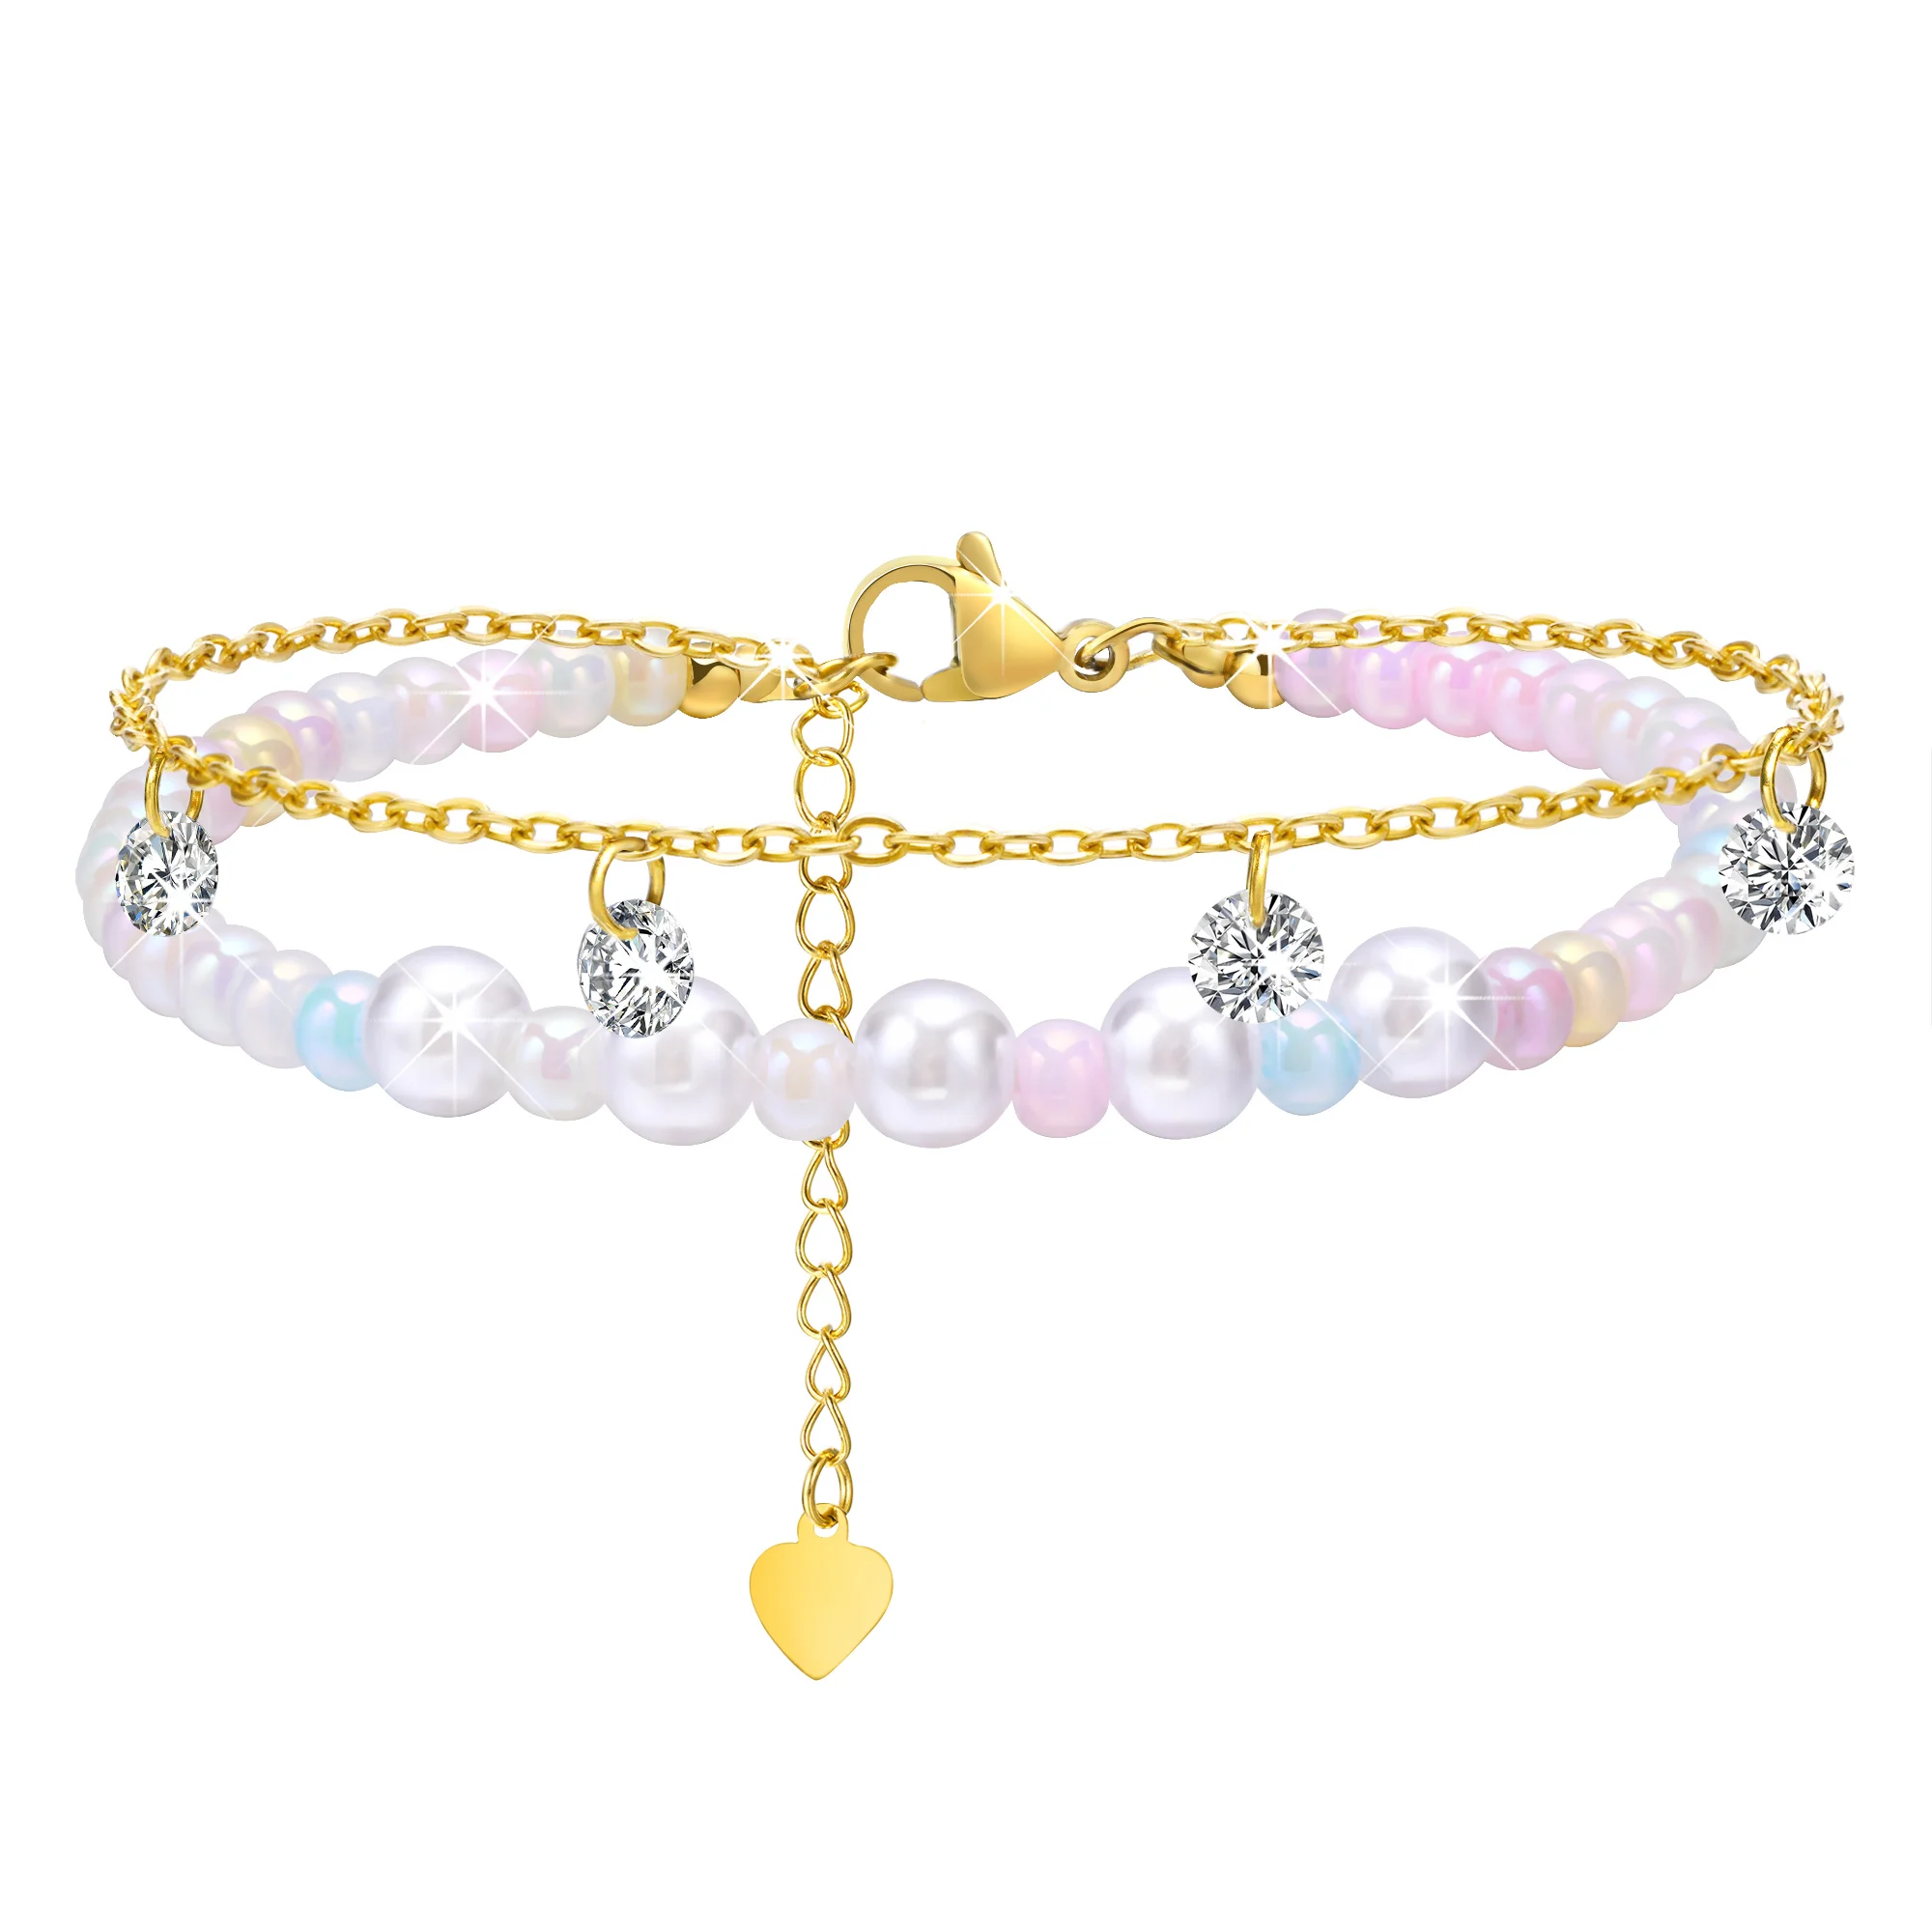 Pearl Strand Beaded Bracelet, Layered Doubld Chain Stainless Steel 18k Gold Plated,CZ Dangling Charms Birthday Gift